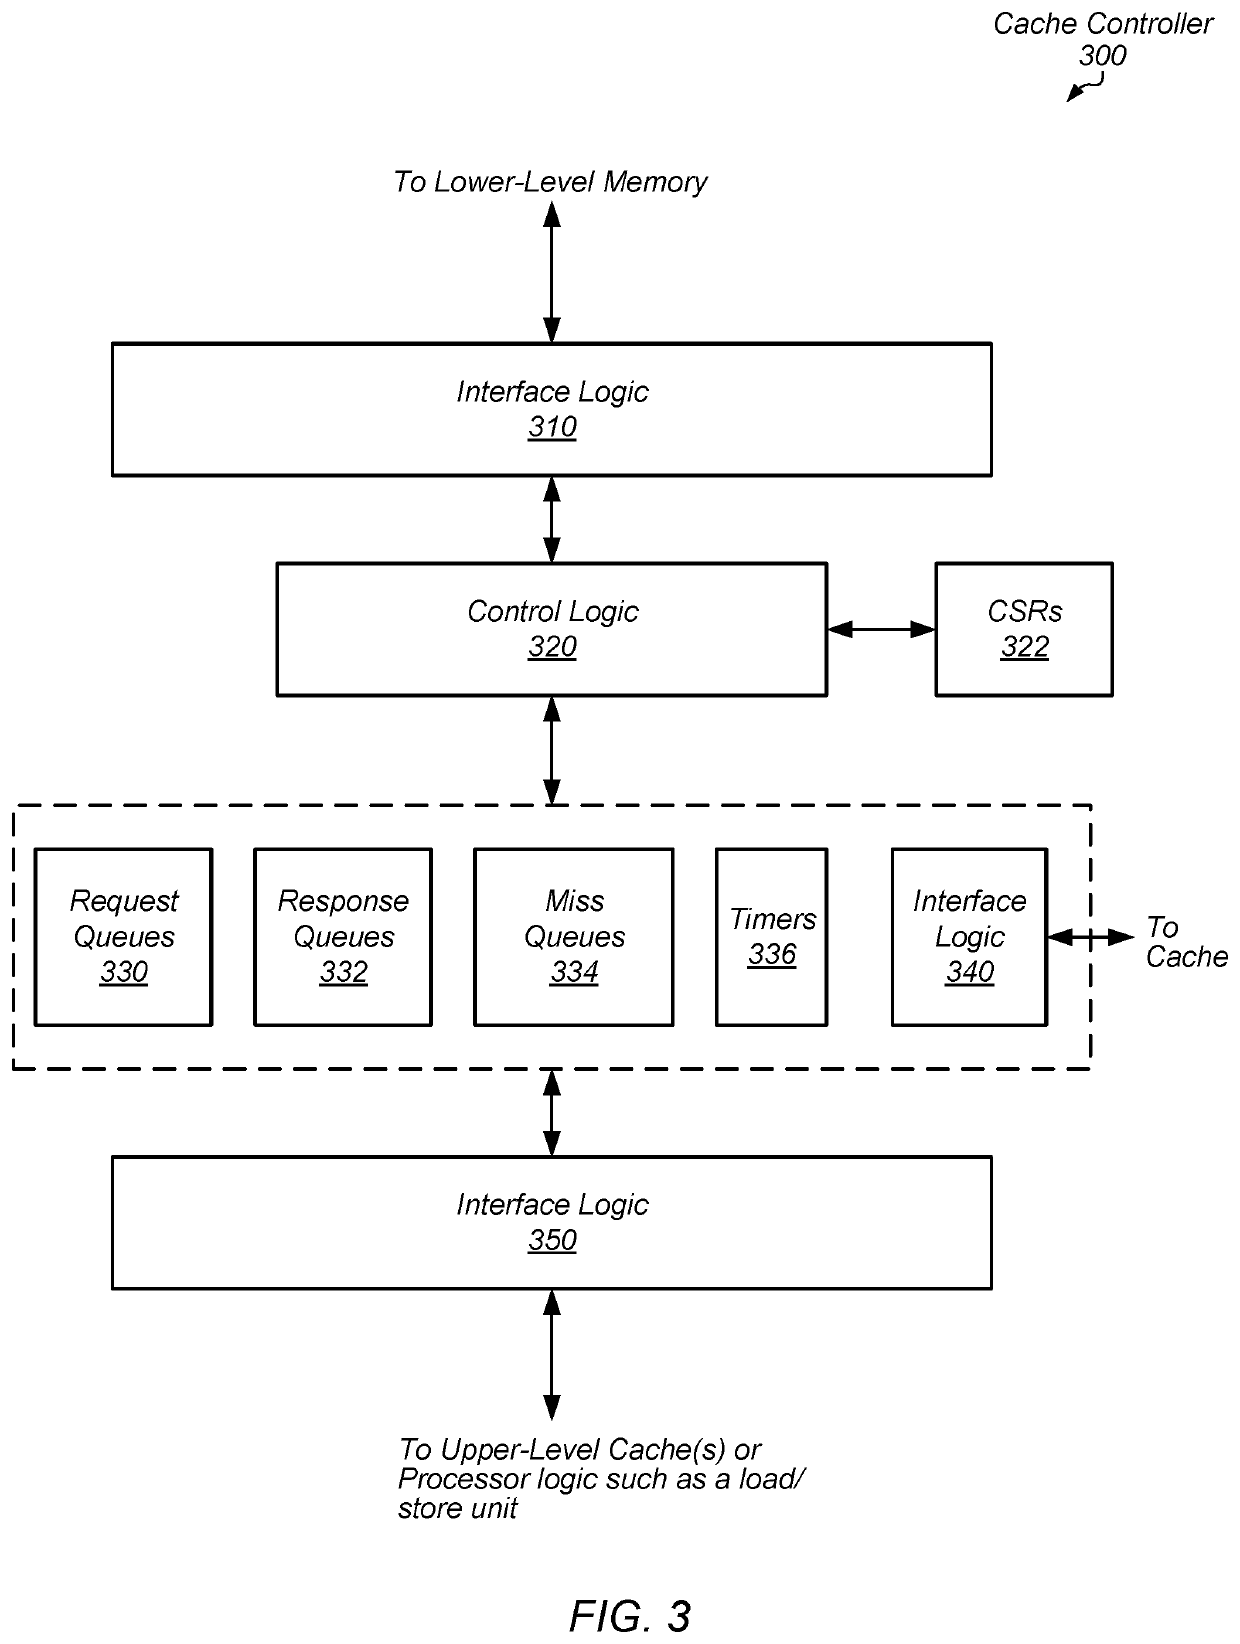 Managing serial miss requests for load operations in a non-coherent memory system